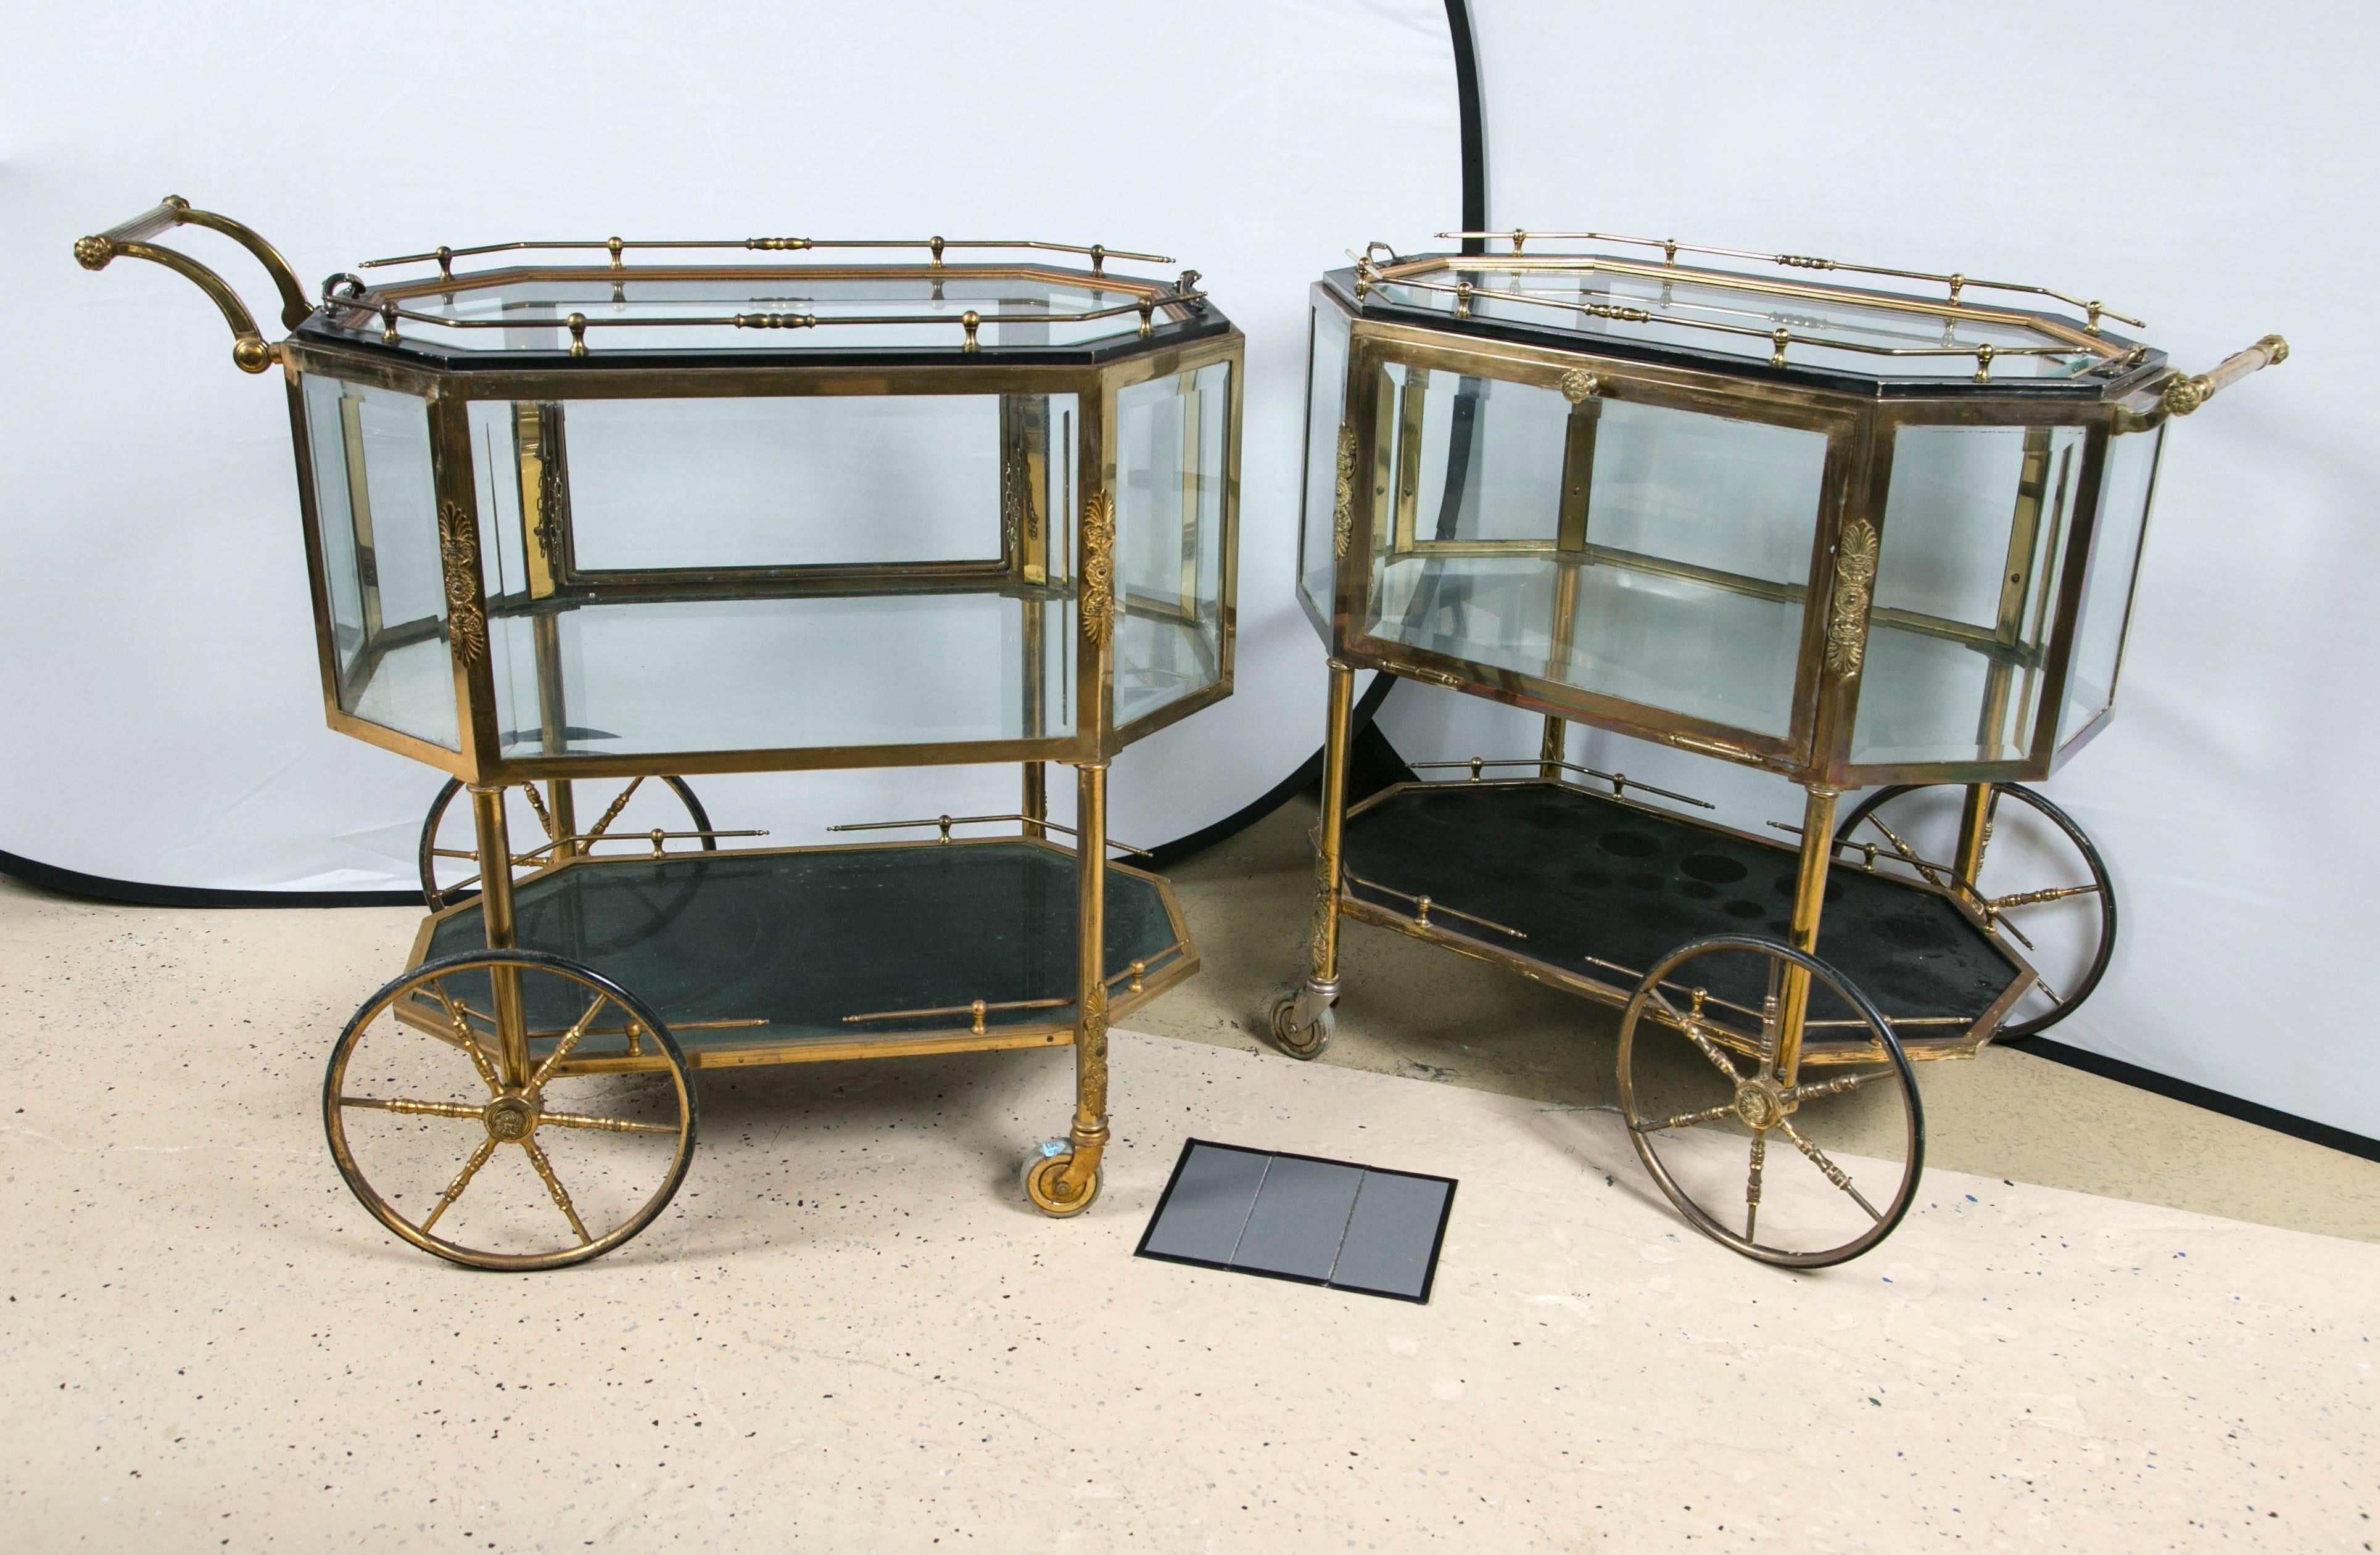 Pair of bronze and glass vitrine serving tea wagons. The large brass wheels make this rolling cart easy to maneuver and give the whole a palatial look. . The all beveled glass case having pull down sides to allow for easy access. The upper and lower